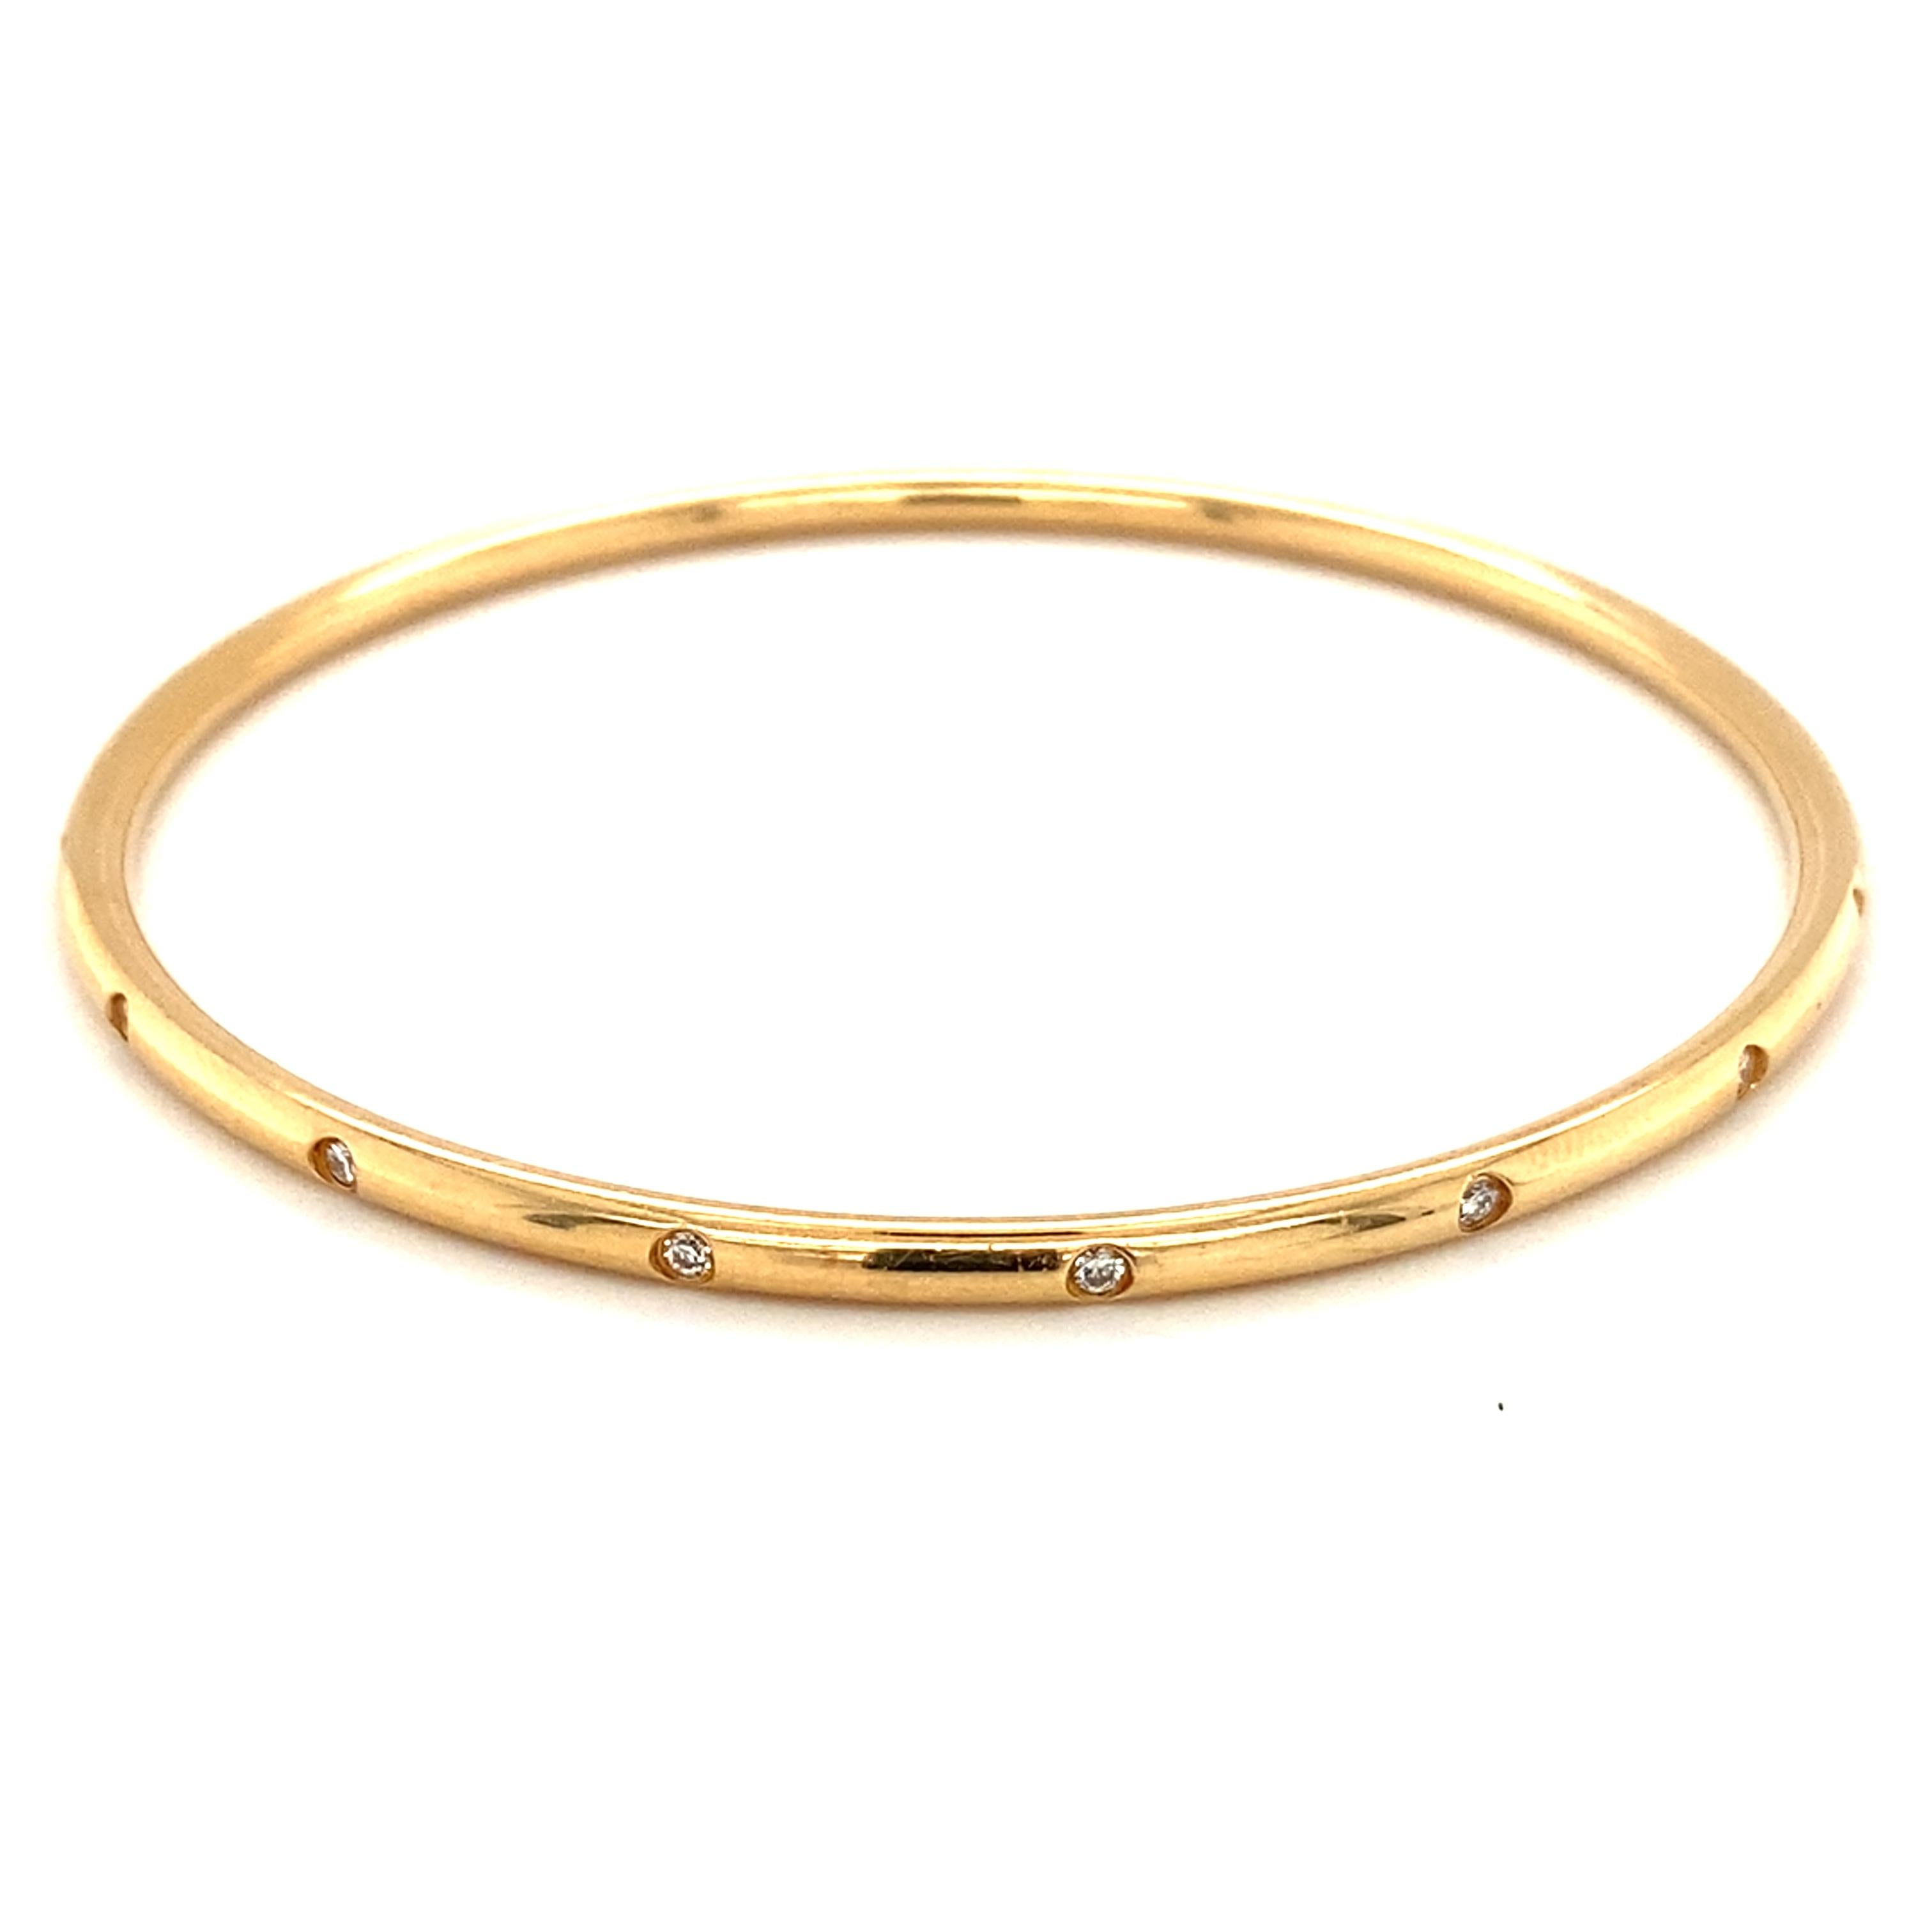 Item Details: 
Tiffany & Co Diamond Bangle
Metal Type: 18 Karat Yellow Gold
Weight: 20 grams

Diamond Details:
Cut: Round
Carat: 0.16 Carats total weight
Color: G
Clarity: VS

Item Features:
This elegant Tiffany & Co. bangle features 0.16 carat